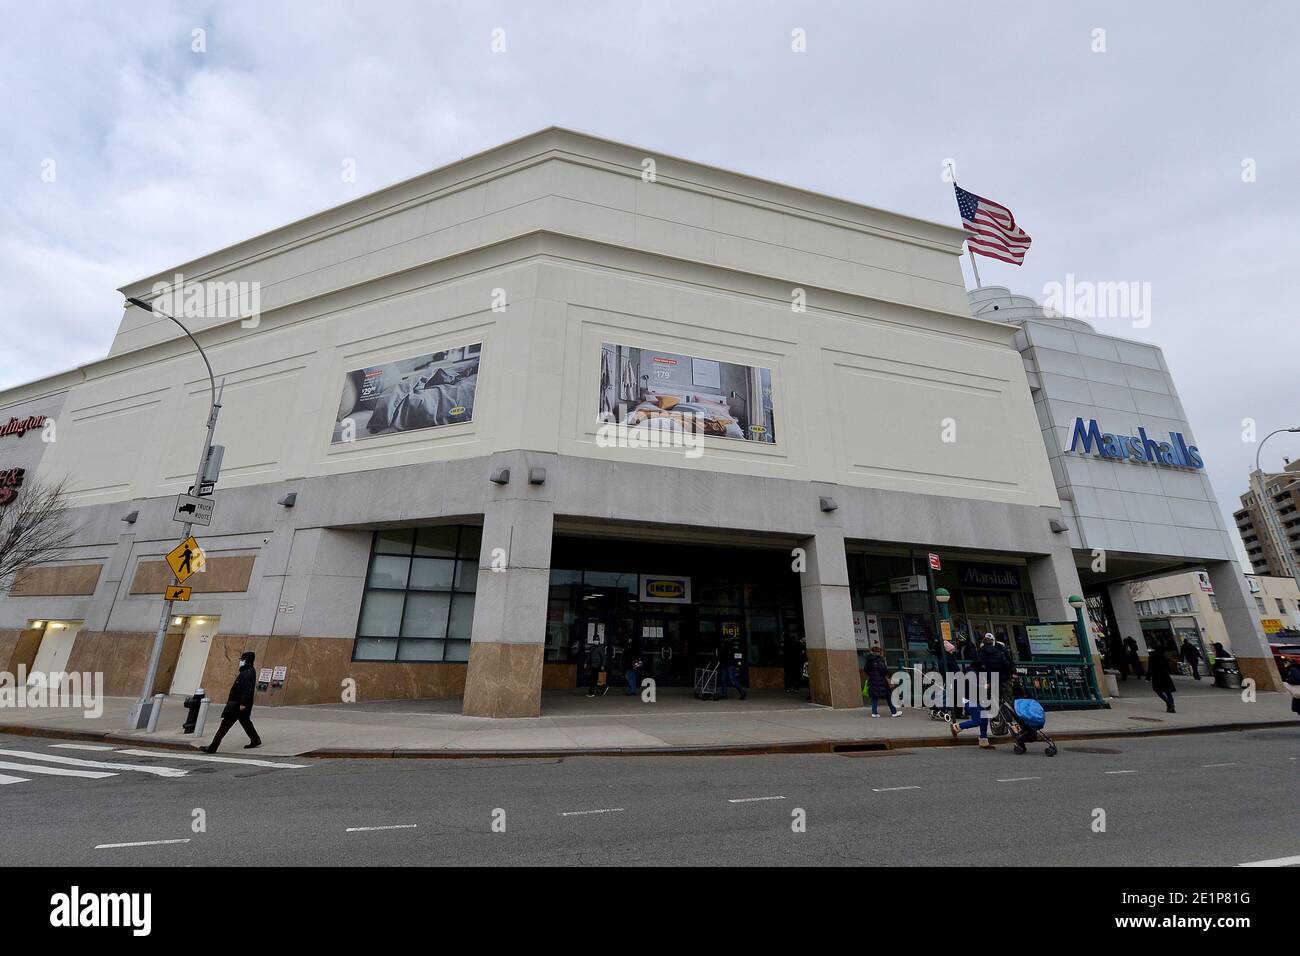 https://c8.alamy.com/comp/2E1P81G/new-york-usa-08th-jan-2021-ikea-the-swedish-furniture-store-chain-opened-its-first-mini-ikea-store-in-the-united-states-in-the-queens-borough-of-new-york-city-ny-january-8-2021-at-only-115000-square-feet-the-store-will-carry-an-array-of-home-furnishing-goods-similar-to-the-larger-stores-but-will-be-geared-toward-storage-solutions-and-small-space-new-york-city-living-conditions-the-opening-date-was-not-announced-to-avoid-large-crowds-in-the-time-of-covid-19-photo-by-anthony-beharsipa-usa-credit-sipa-usaalamy-live-news-2E1P81G.jpg